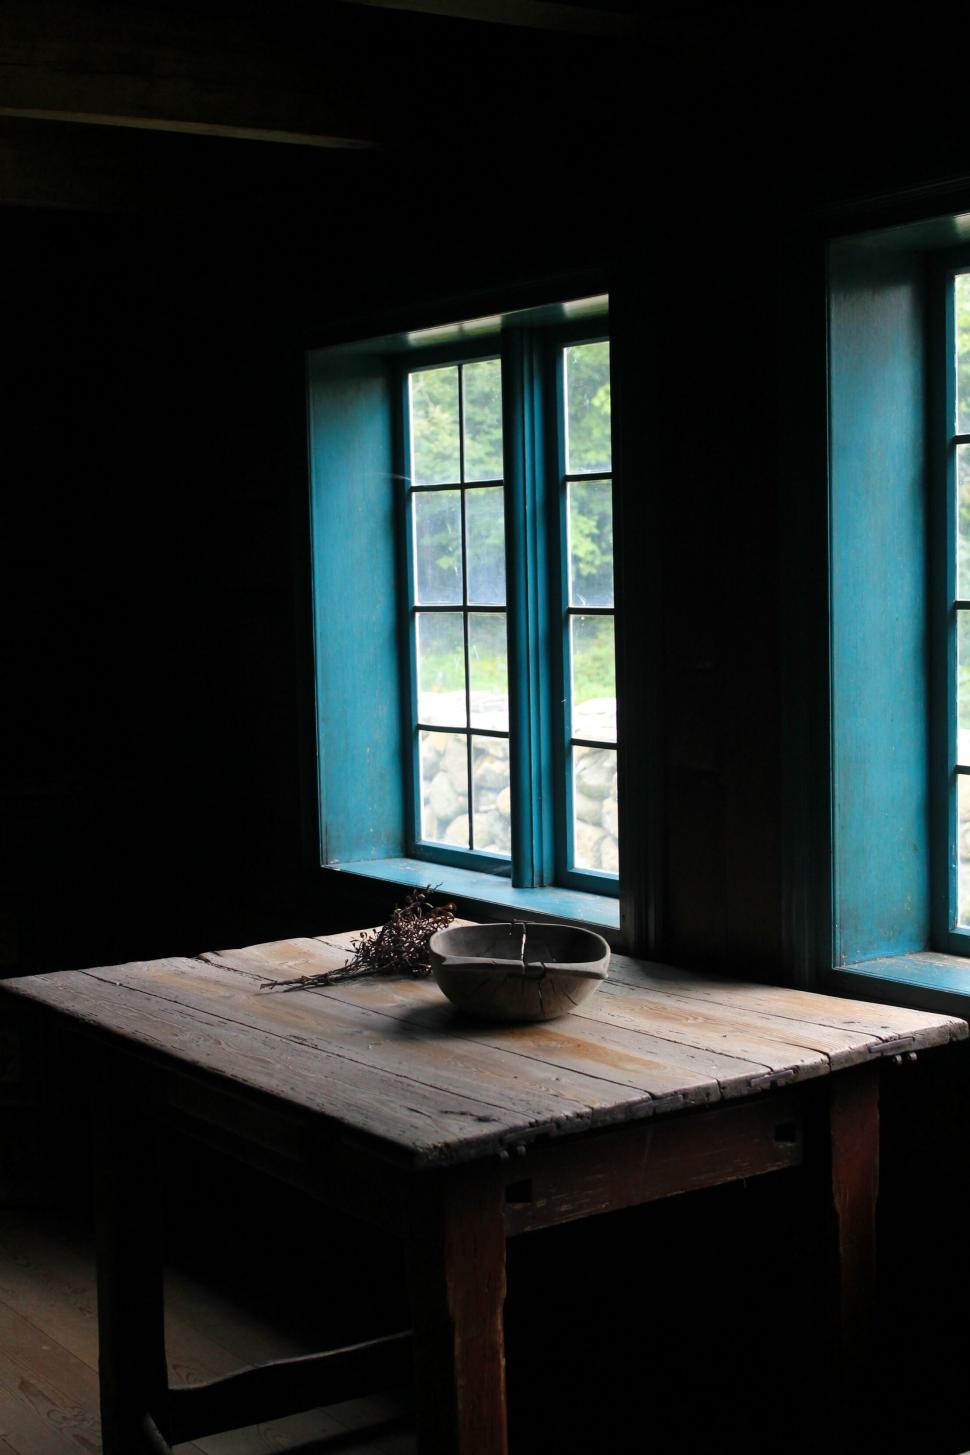 Free Image of Rustic wooden table by a cabin window with view 